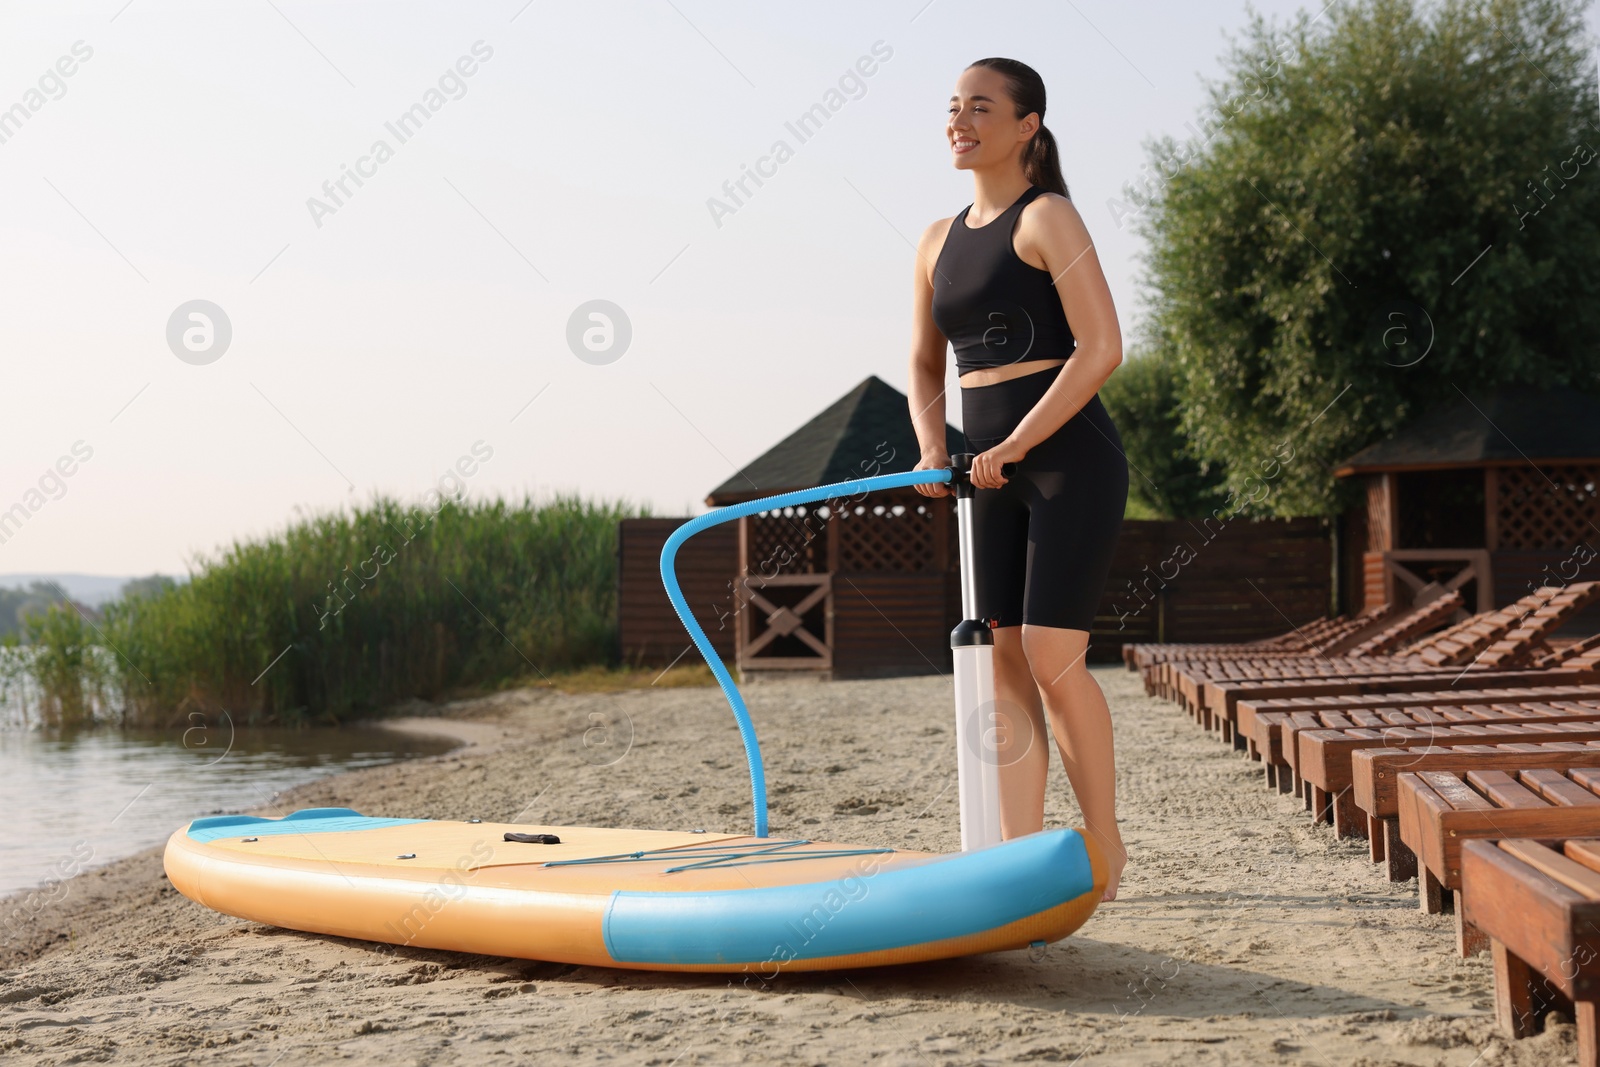 Photo of Woman pumping up SUP board on river shore